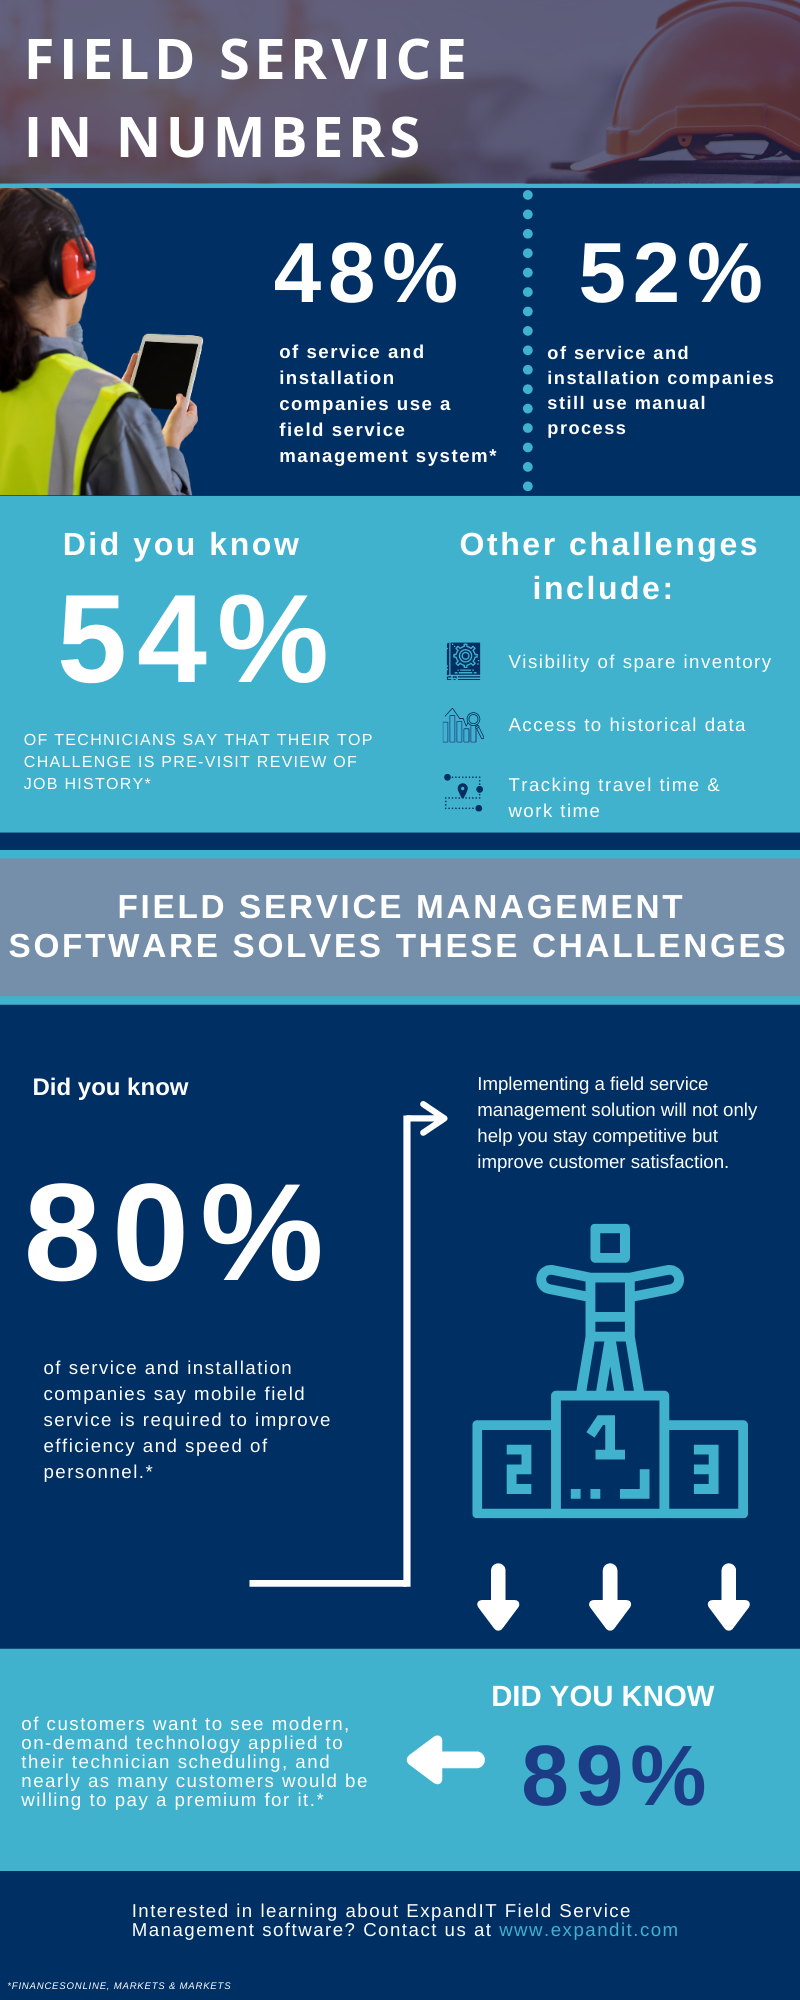 Field Service in Numbers infographic